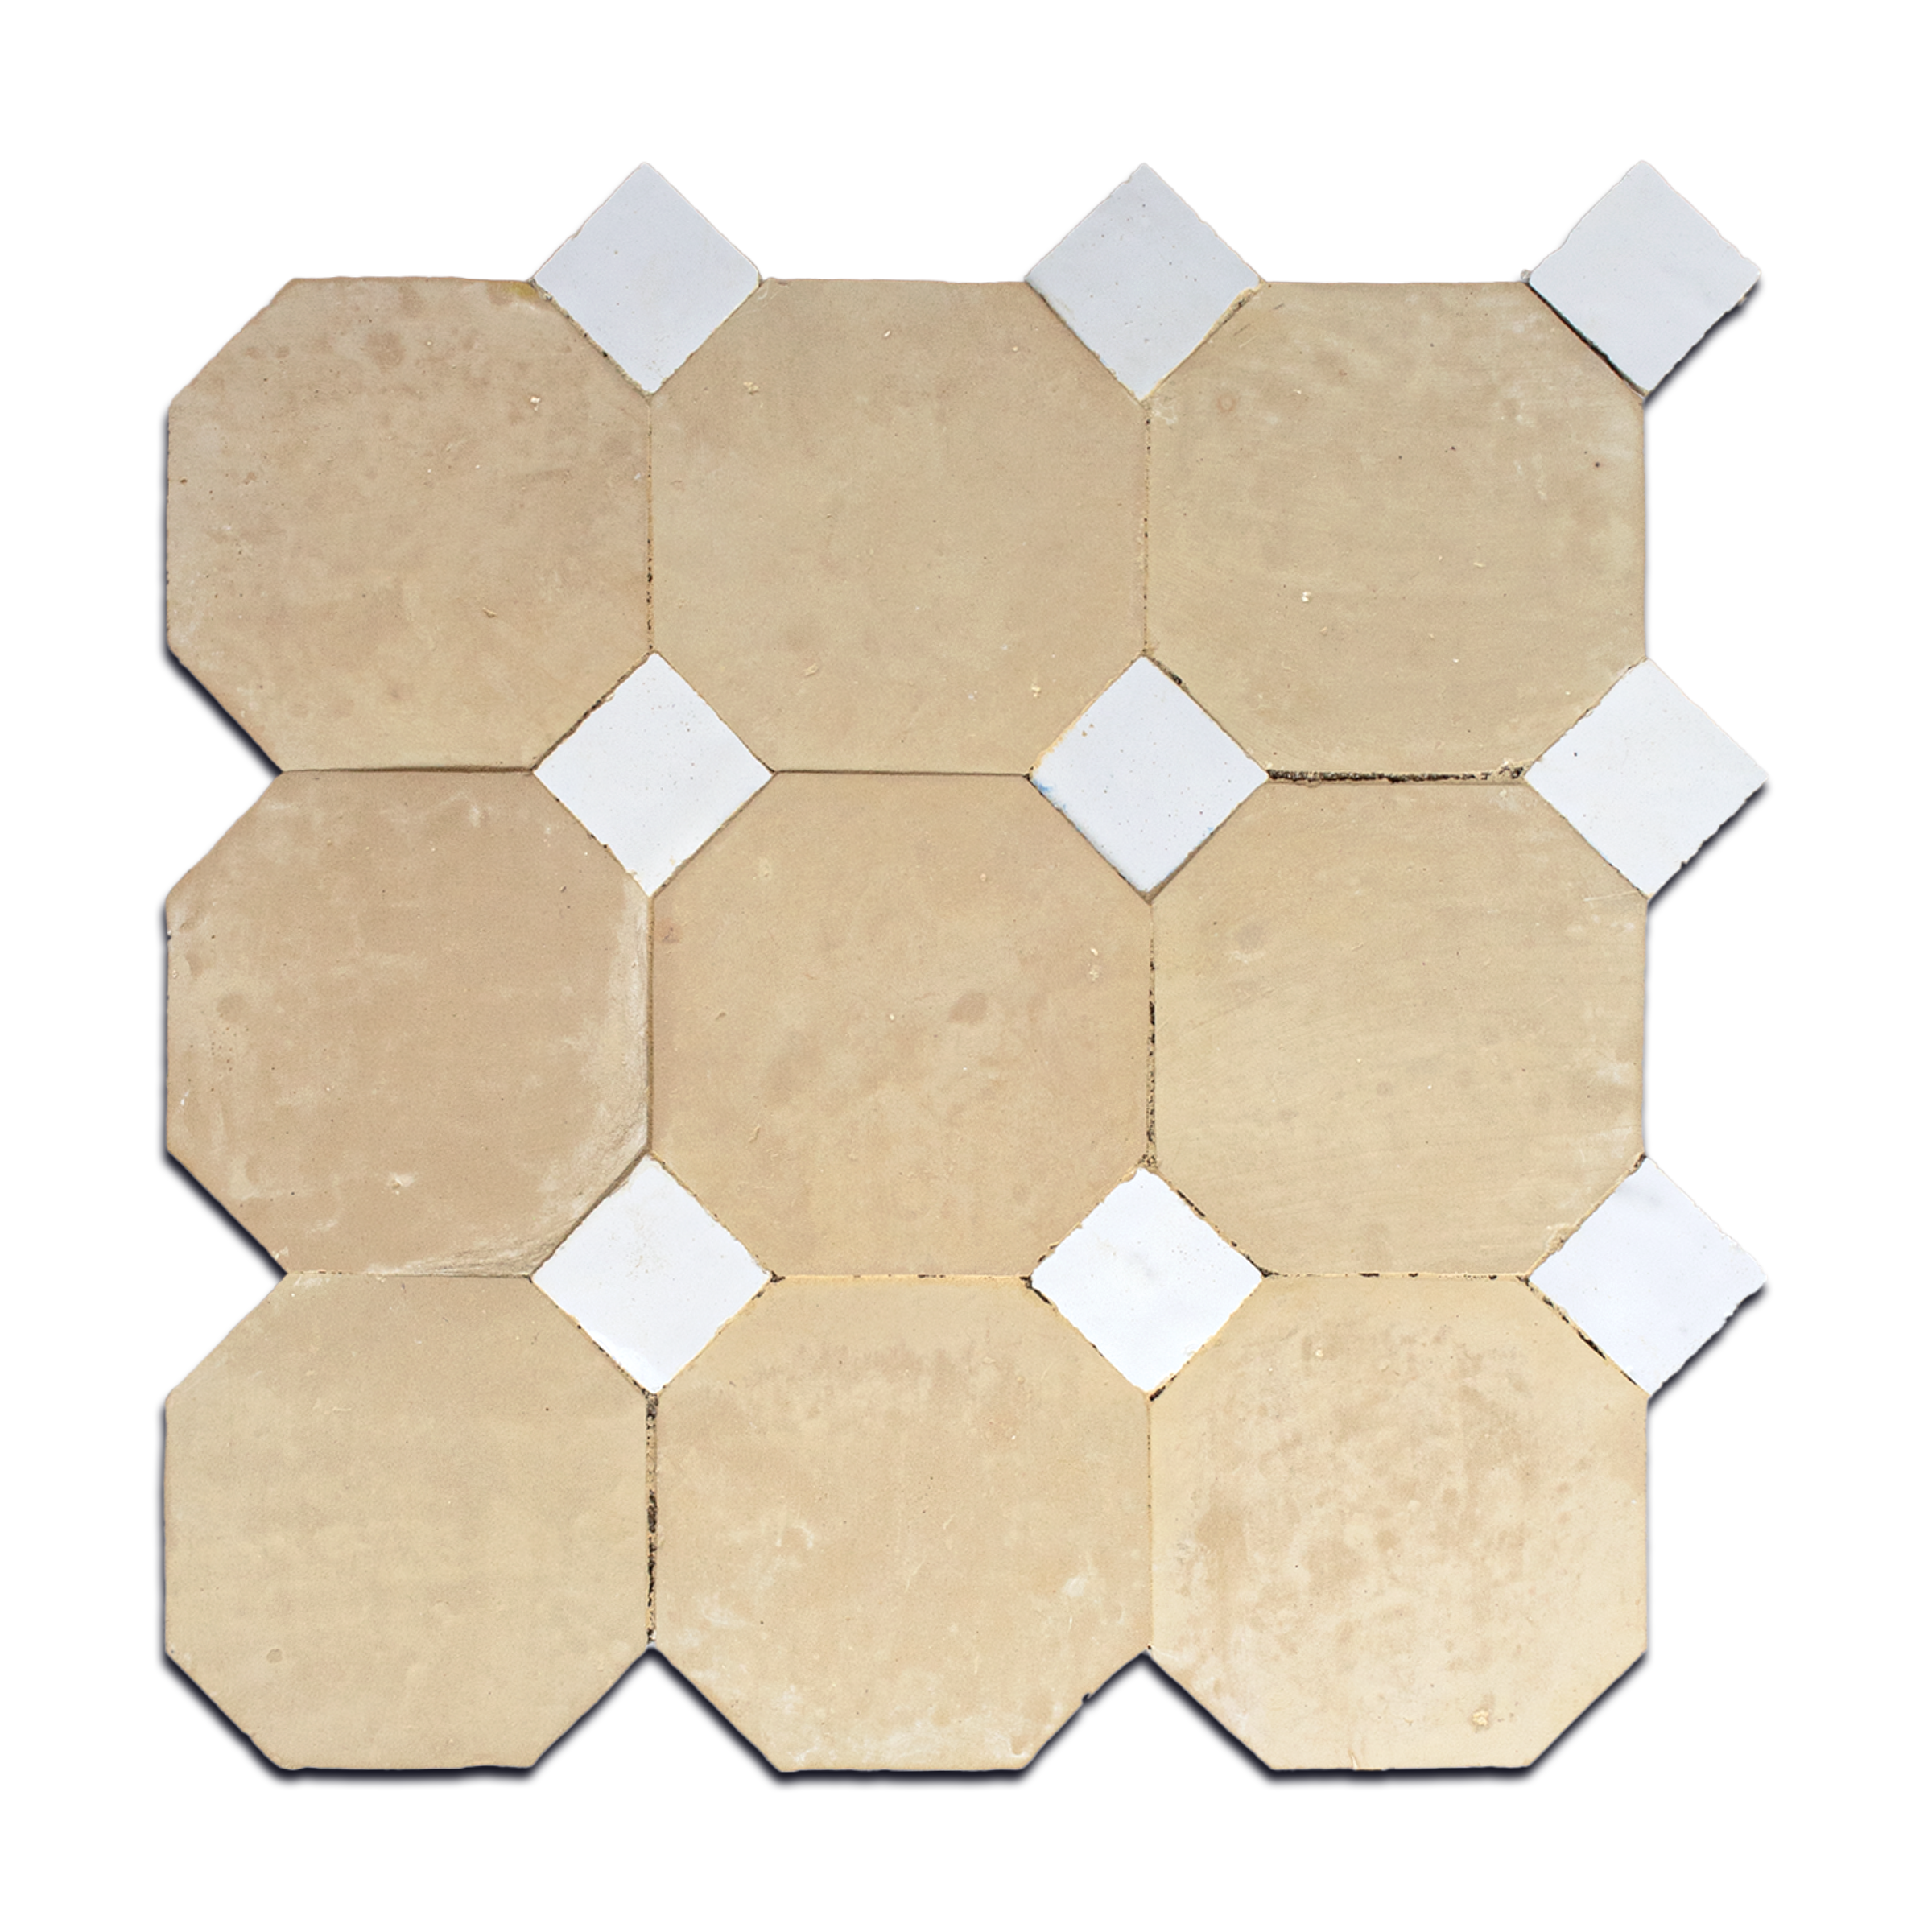 Unglazed Octagon with Himalayan Salt White Dots Moroccan Mosaic